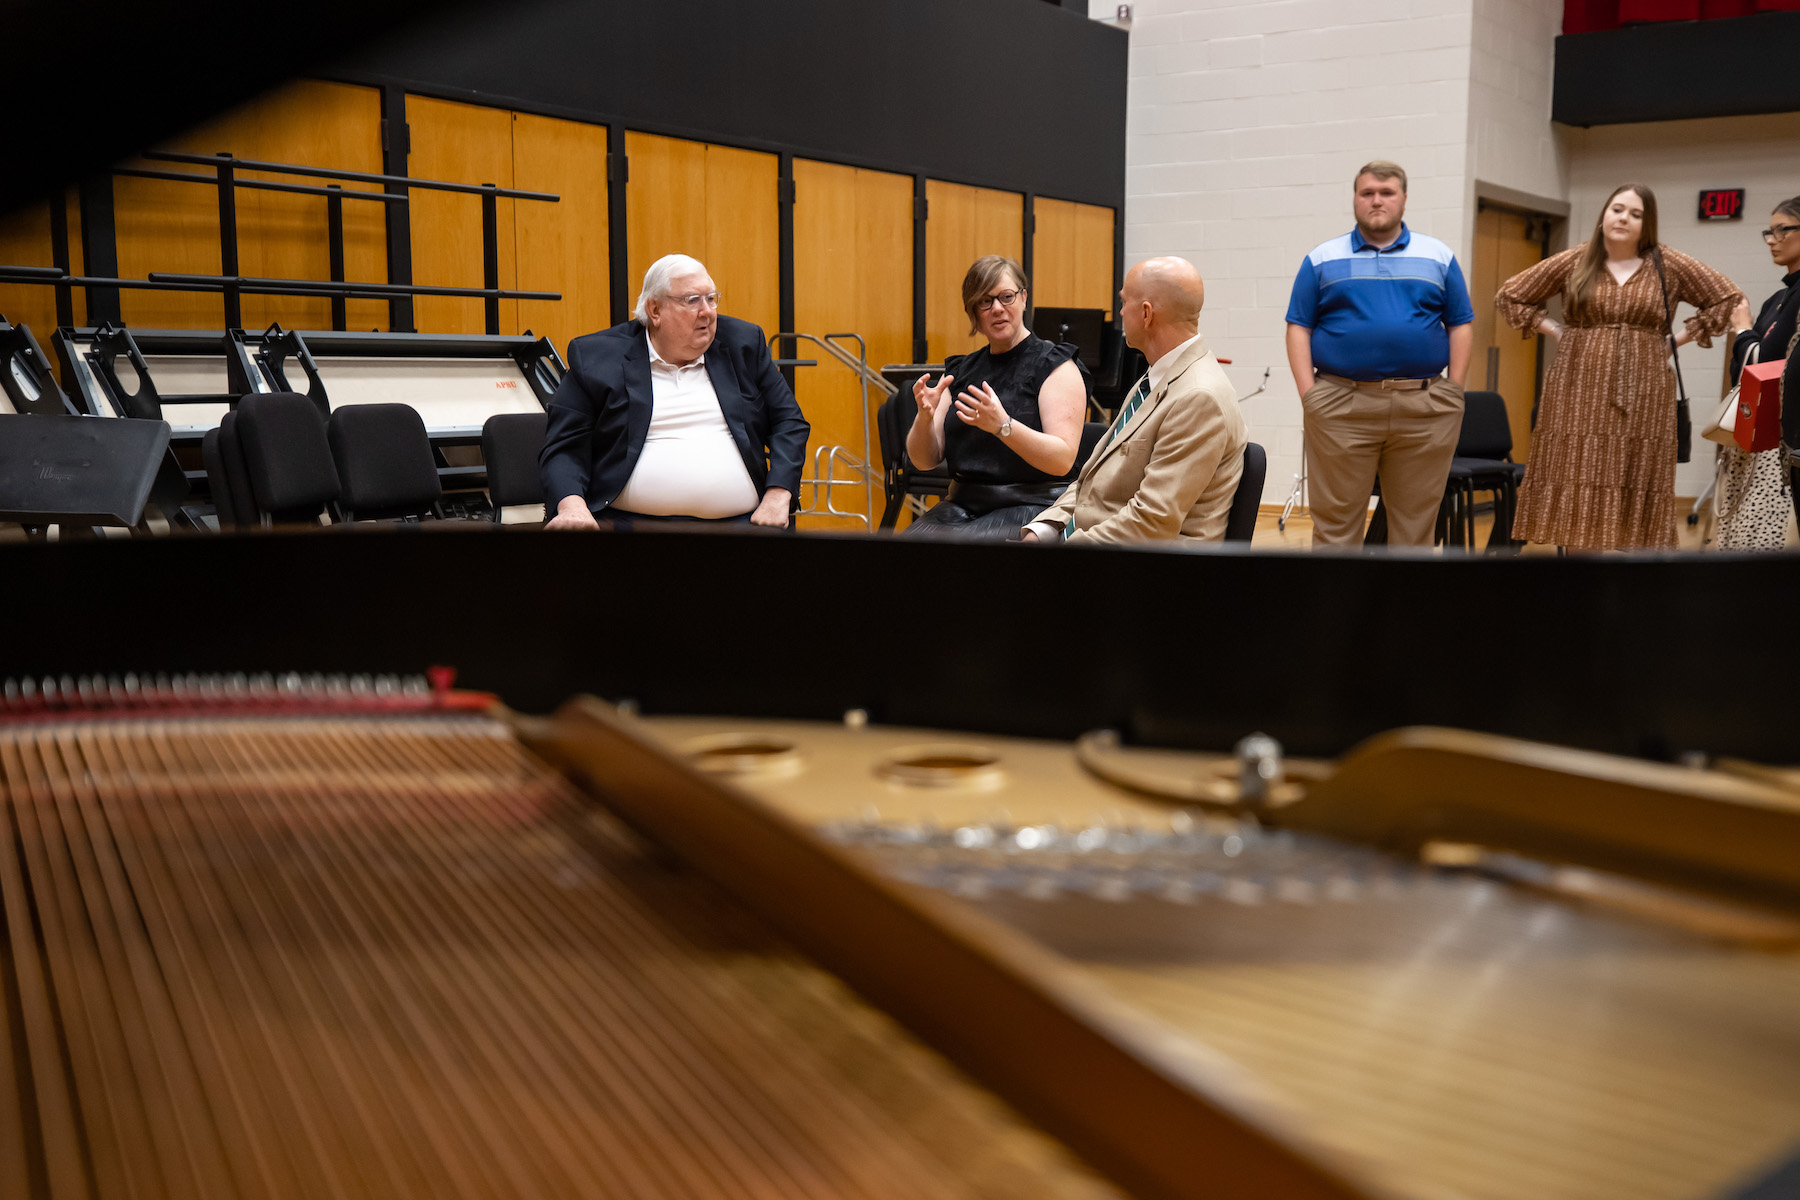 This week's photos come from a health and human performance class and the donation of a Steinway piano - and everything between.